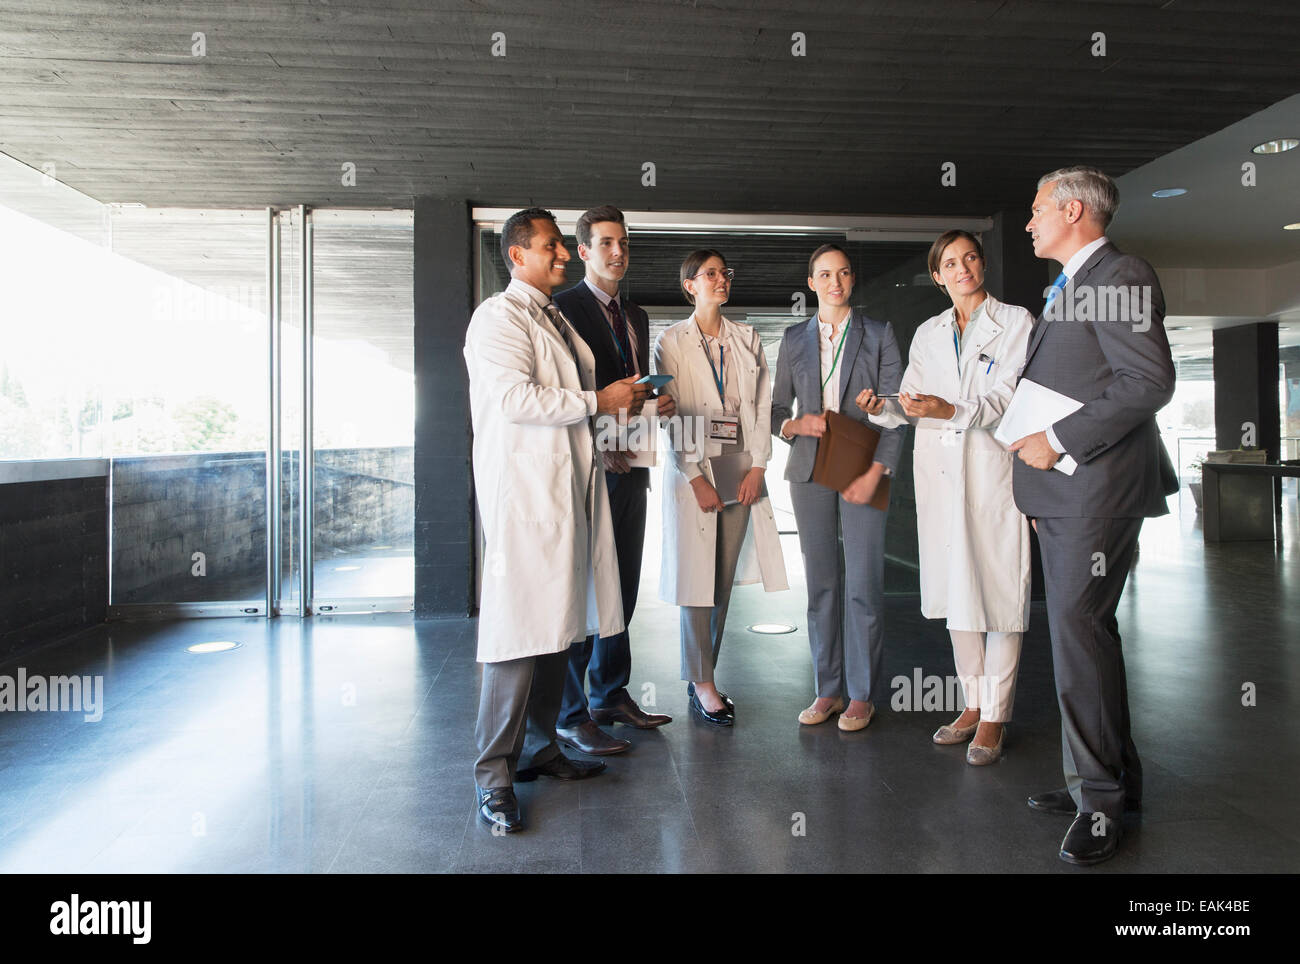 Scientists and business people talking in lobby Stock Photo